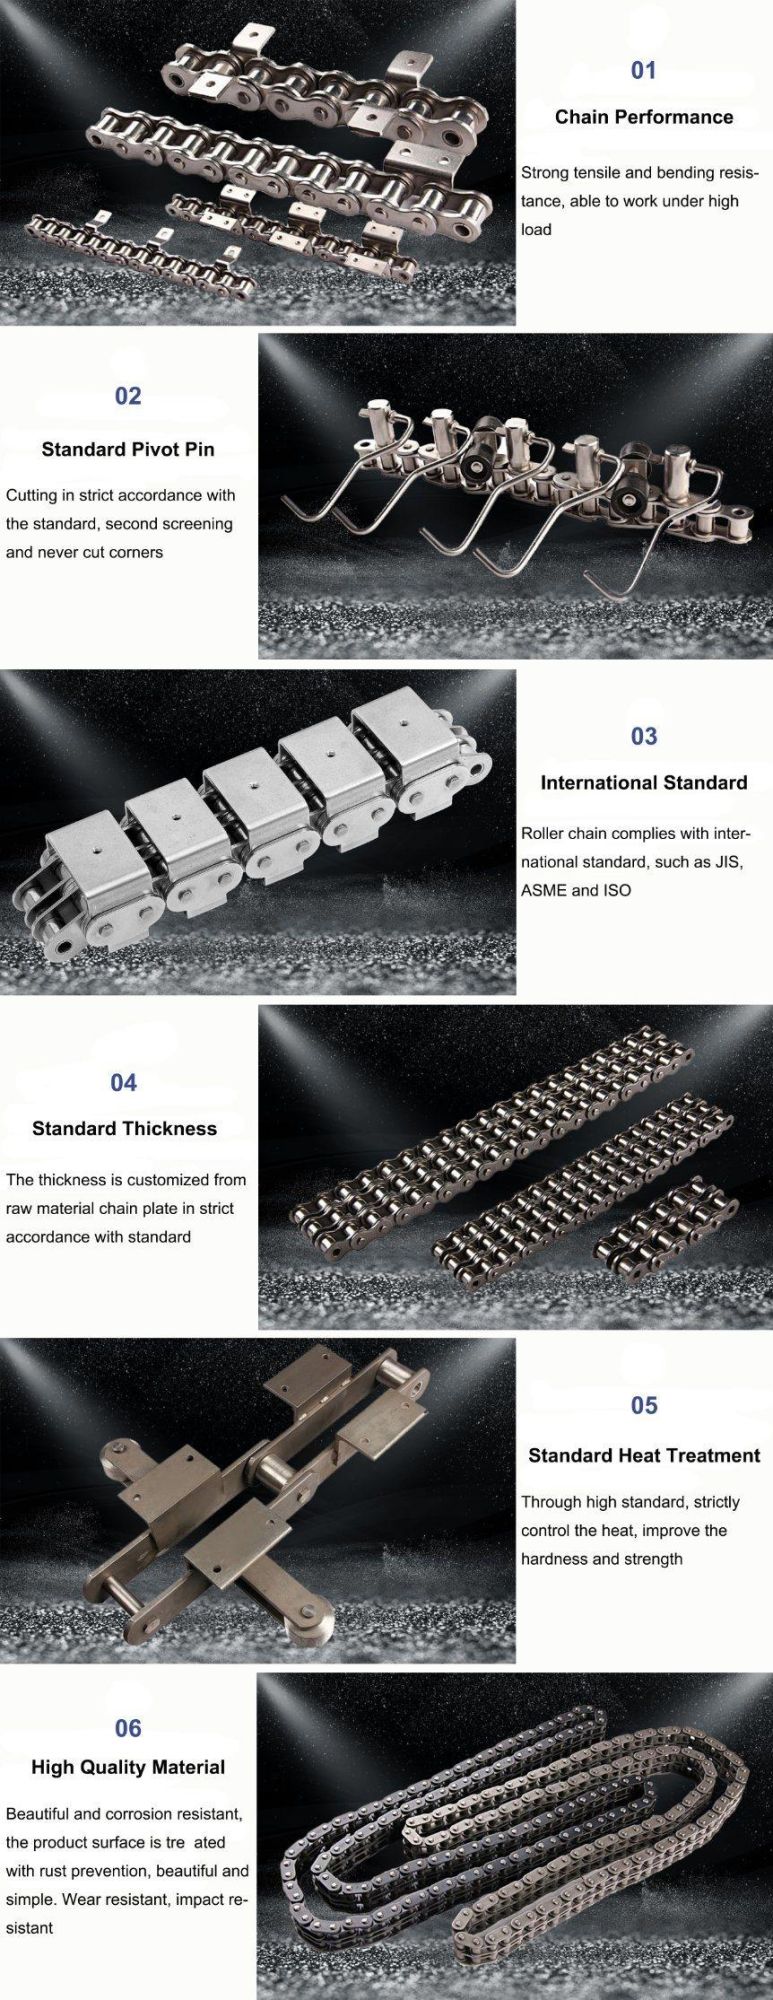 Ss881tab-K750 Pitch 38.1mm Stainless Steel Chain Flat Top Conveyor Chains Table Flat Top Chains